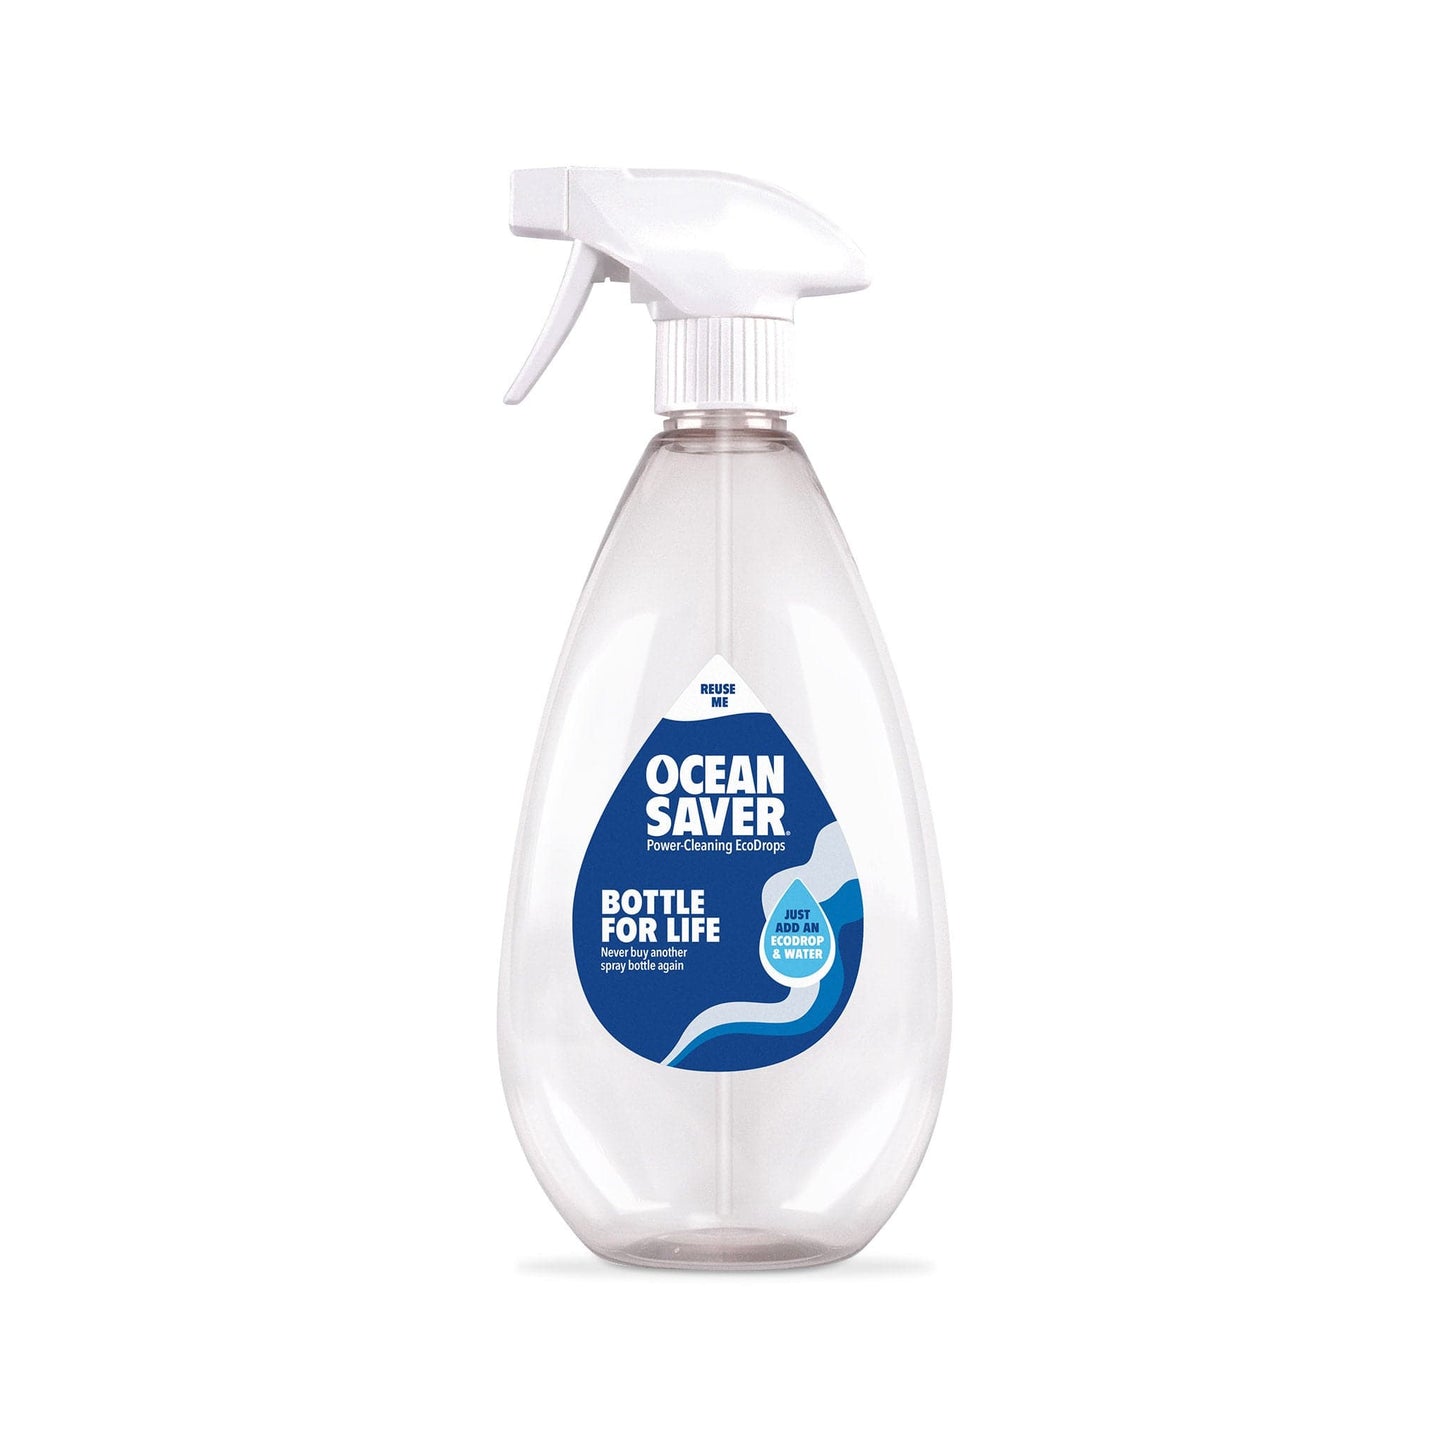 Ocean Saver All-Purpose Cleaners Ocean Saver Bottle for Life 750ml - Made from Prevented Ocean Plastic